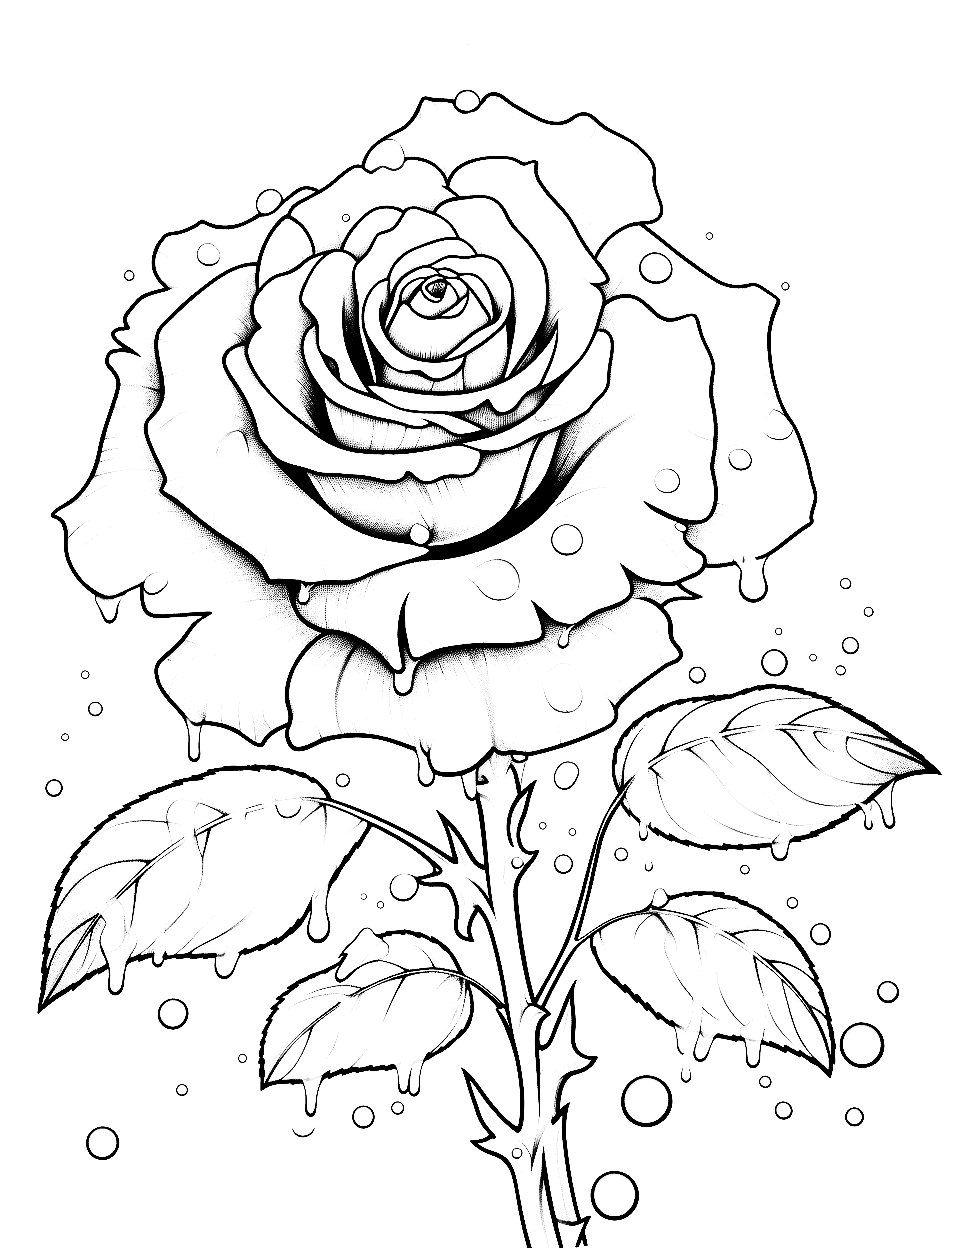 Rose's Thorny Grace Adult Coloring Page - A rose in full bloom with dew drops on its petals.